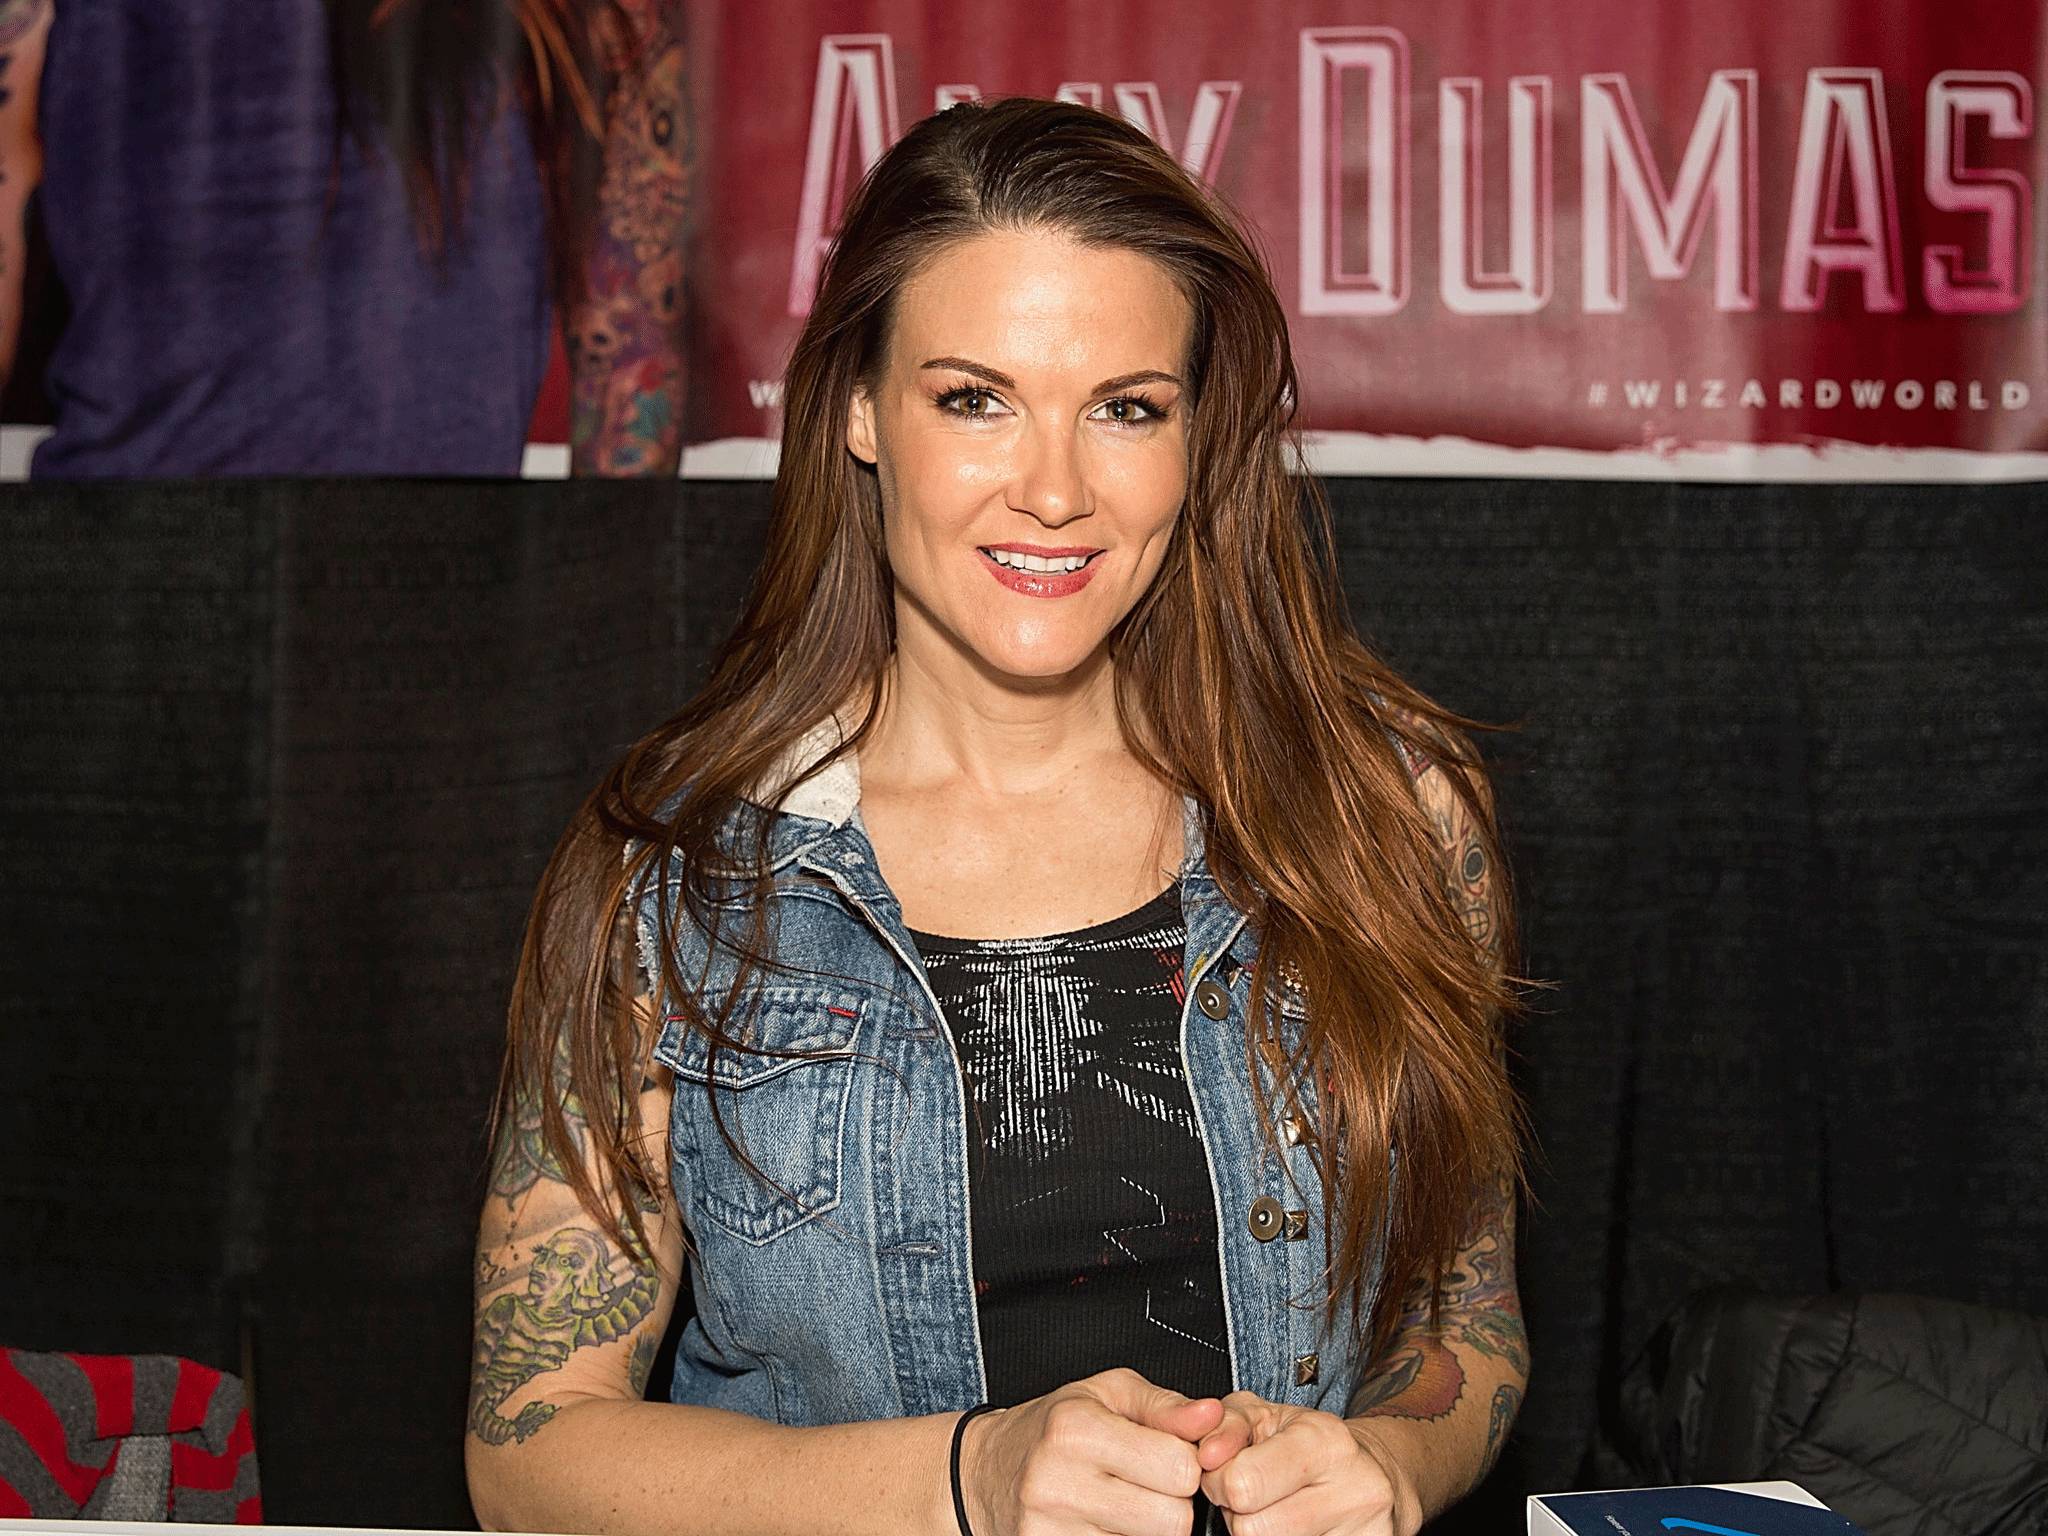 Lita to be inducted into WWE Hall of Fame 2014 at Wrestlemania 30